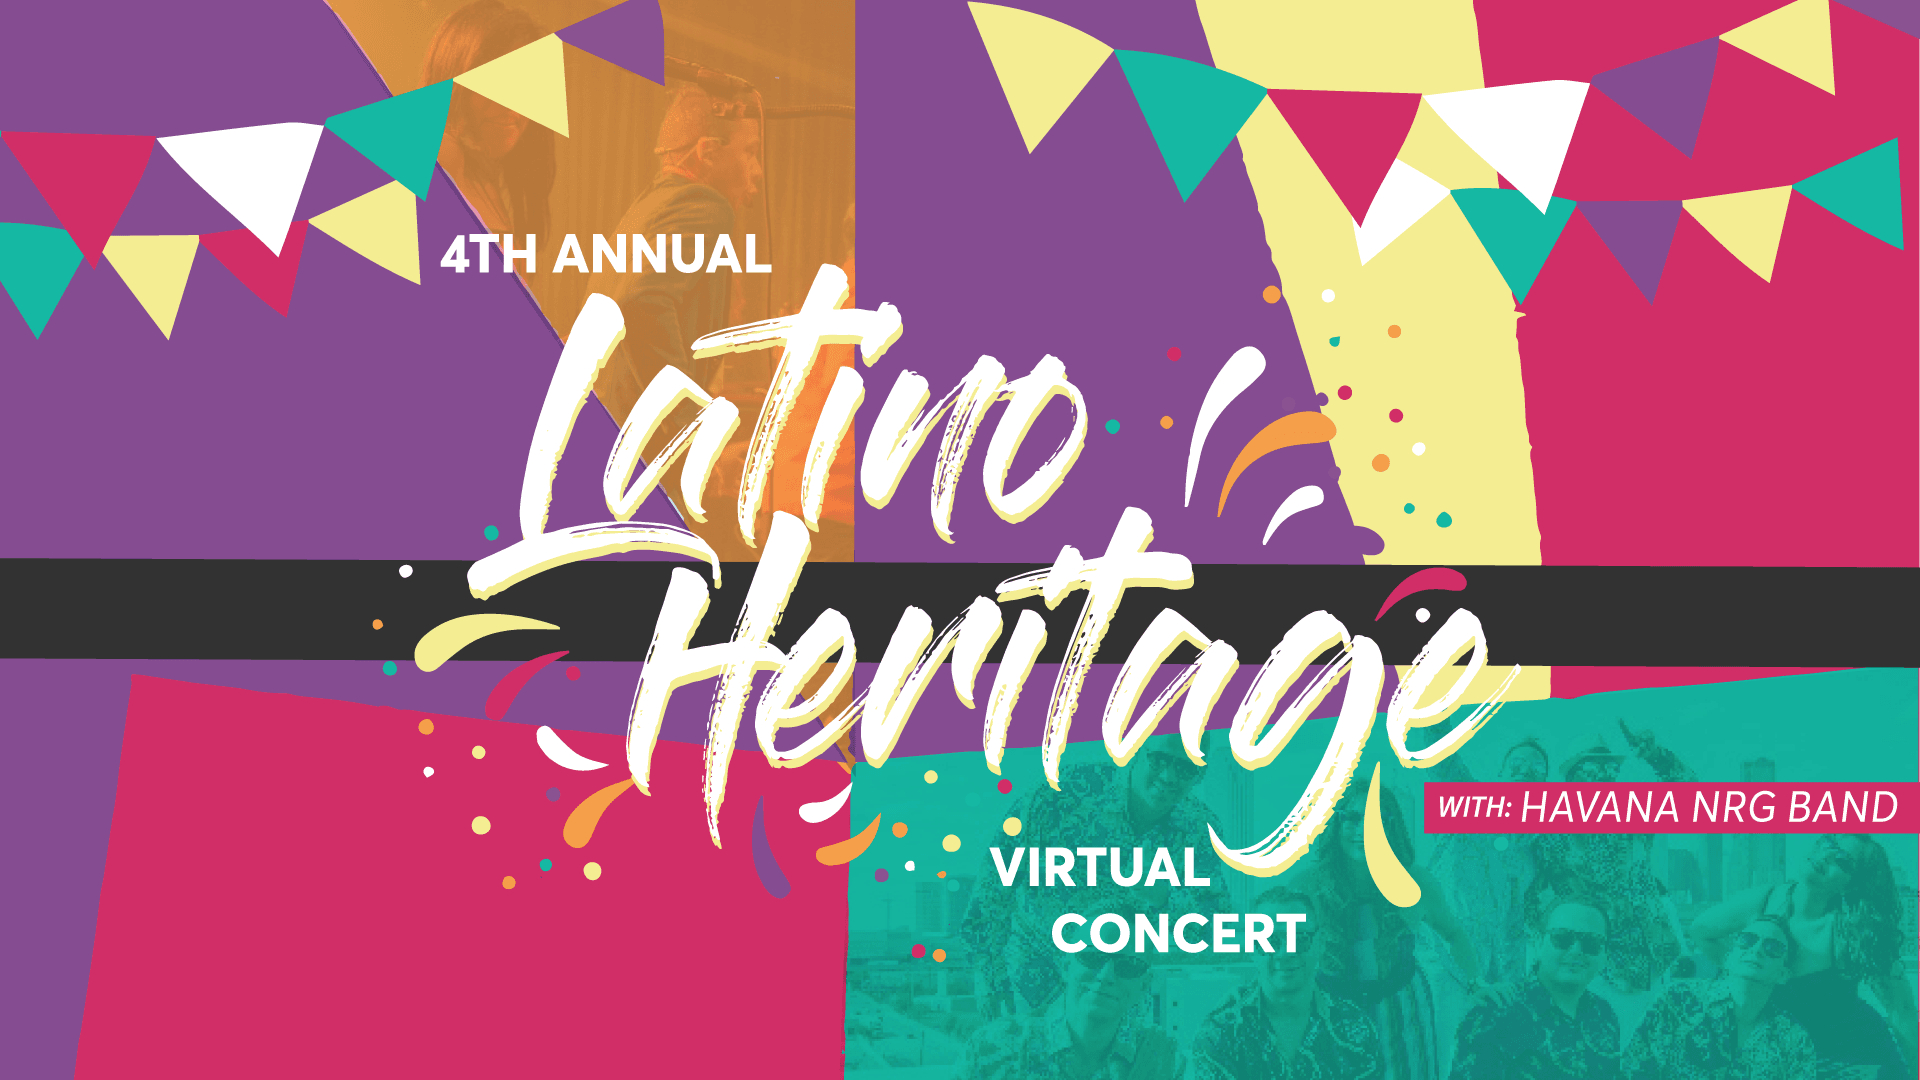 DeSoto Parks and Recreation Presents the Latino Heritage Virtual Concert